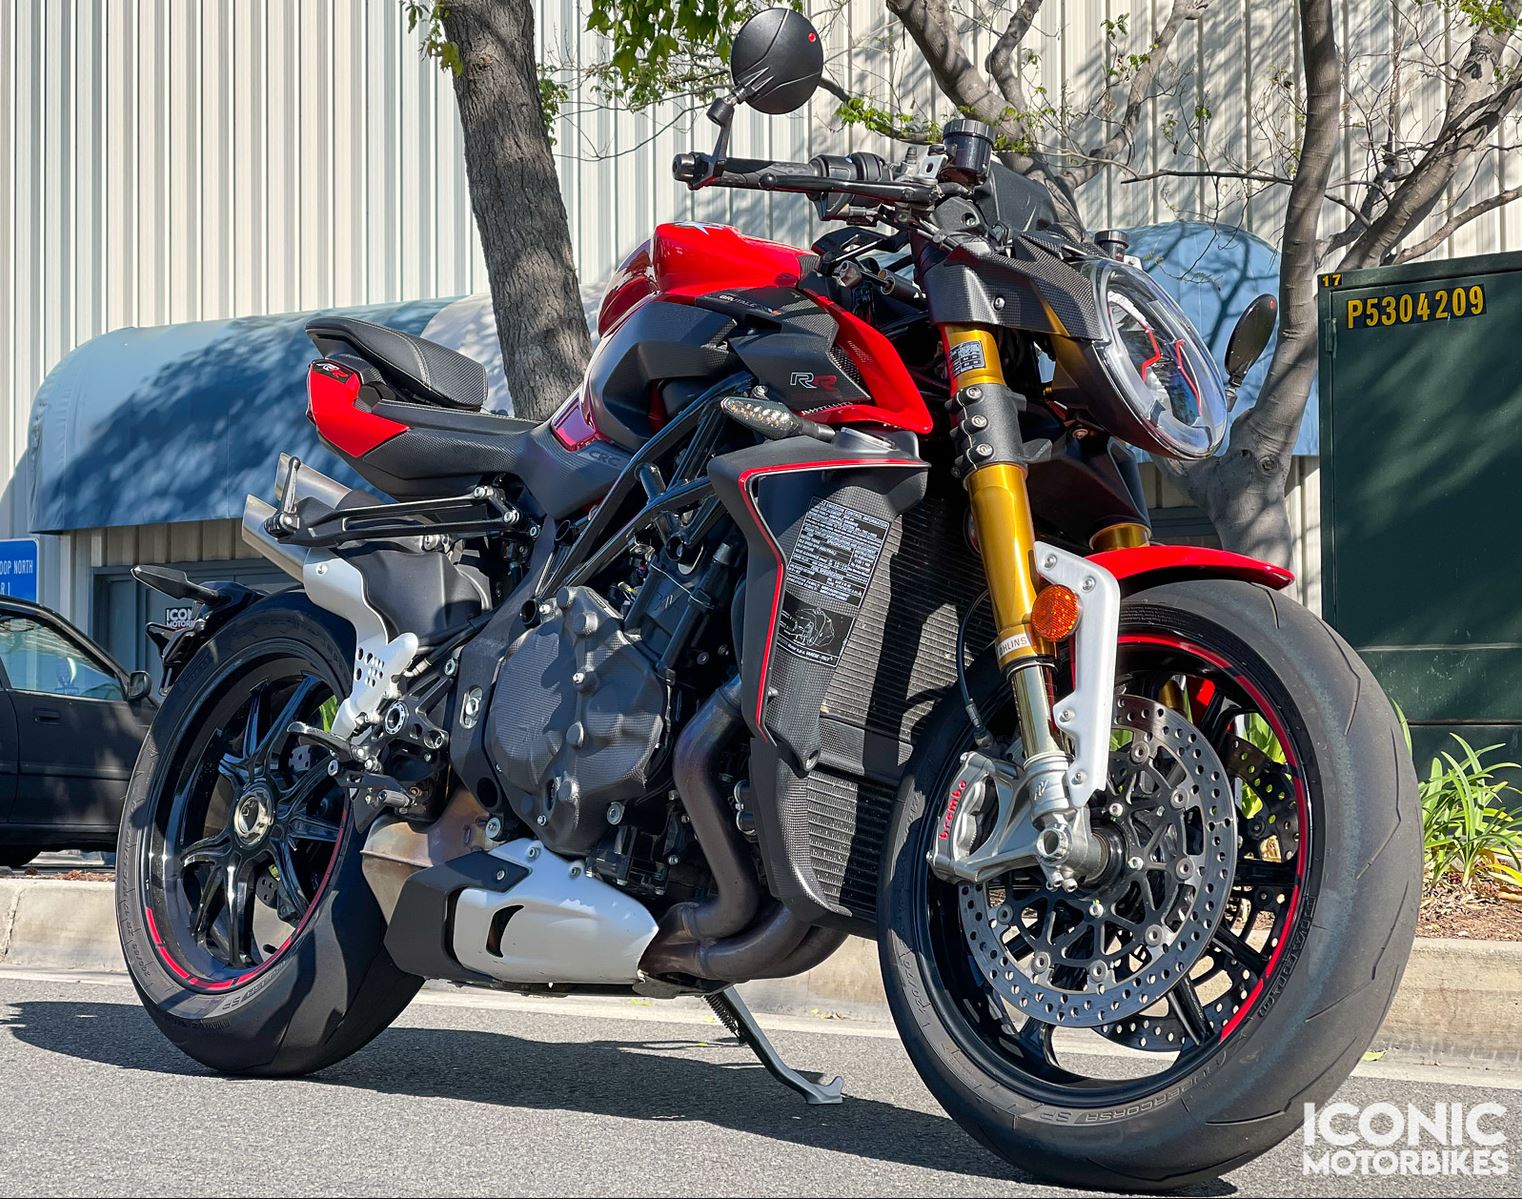 New MV Agusta 1000 RR Motorcycles for sale